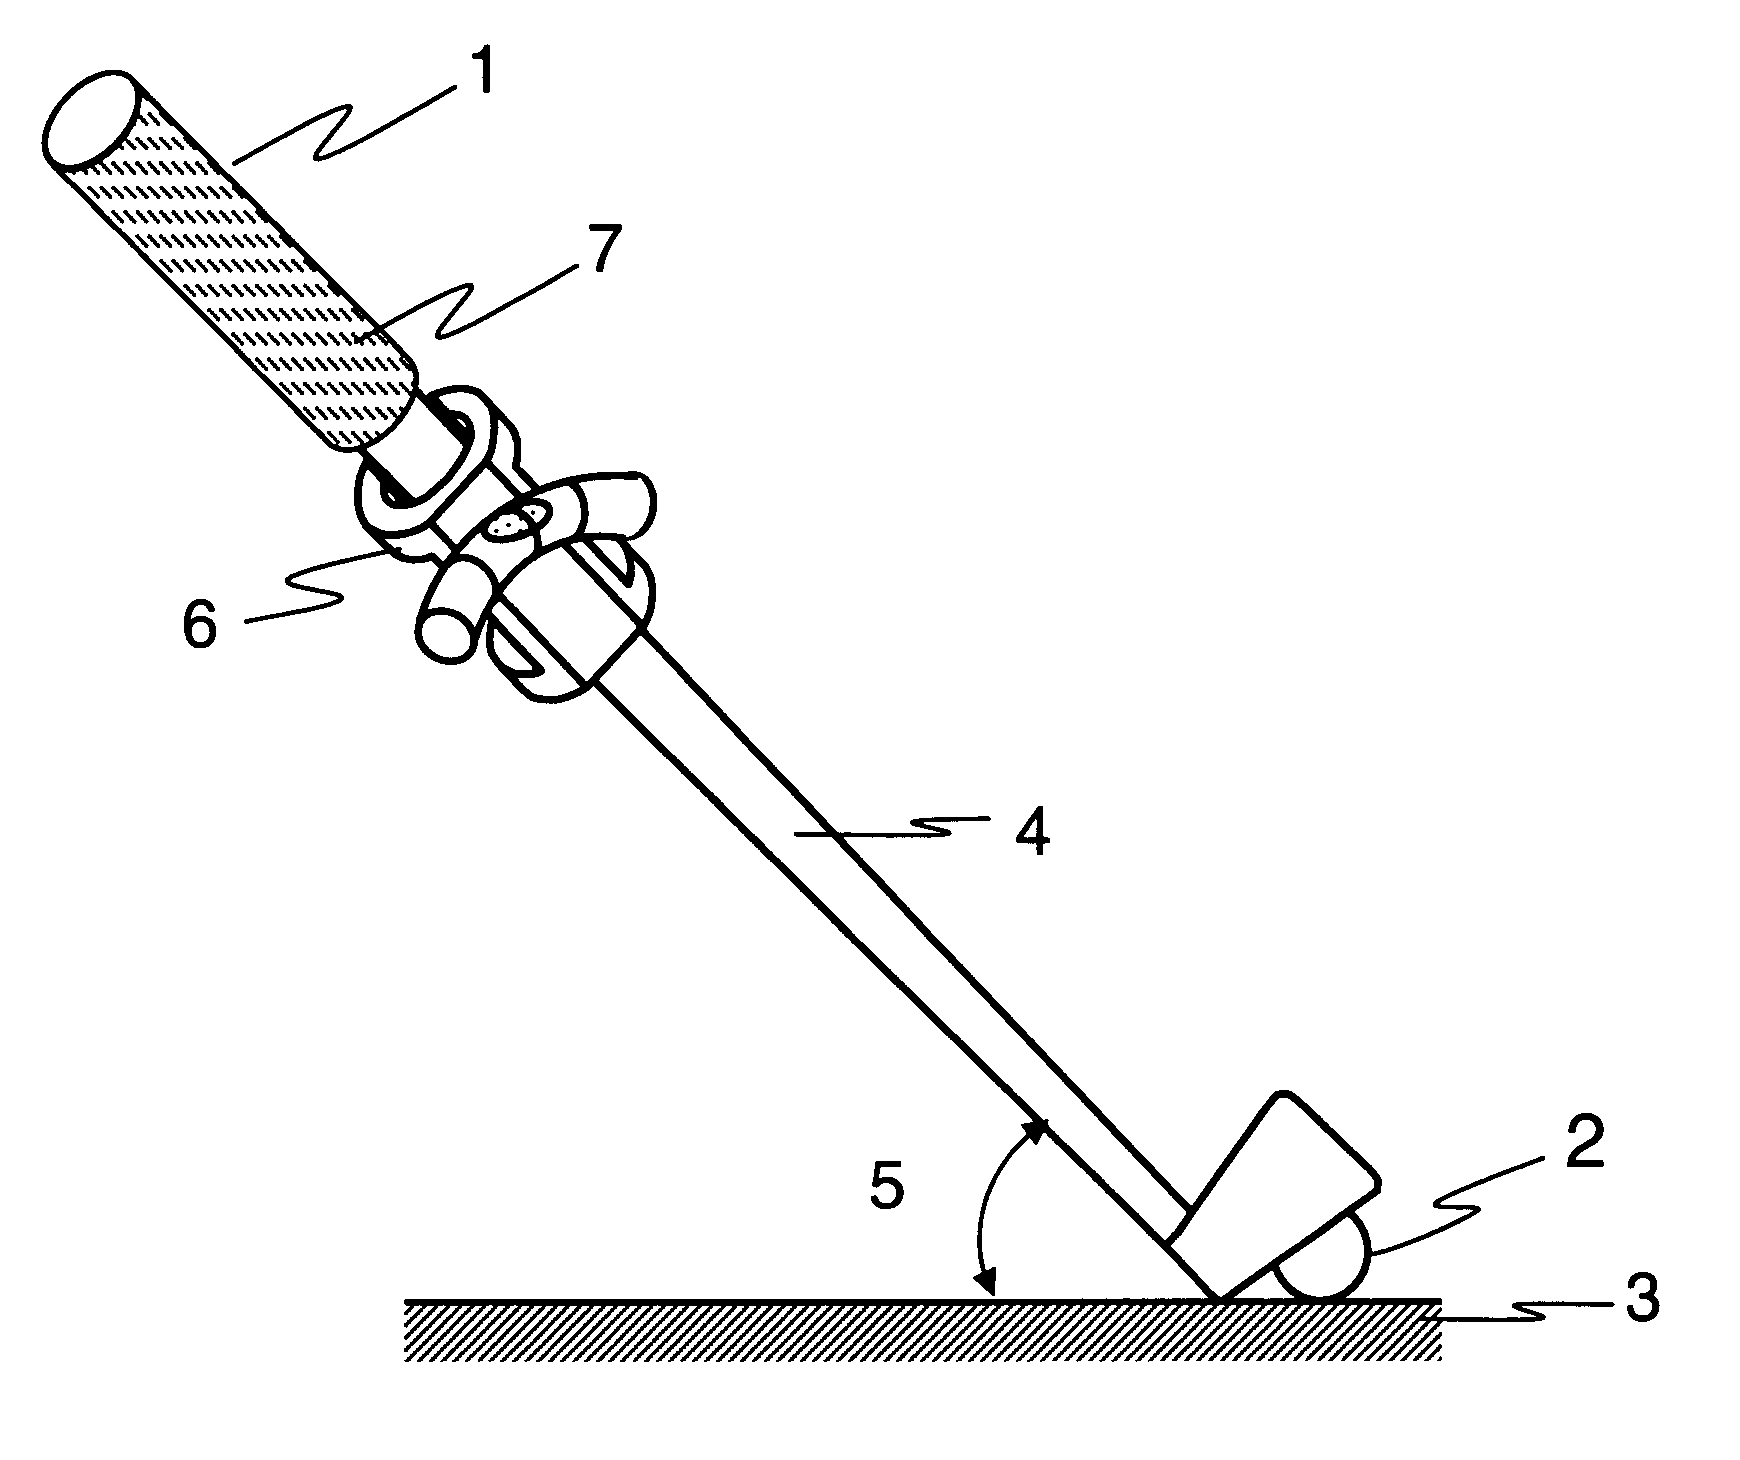 Method and apparatus for executing repeatable golf swings